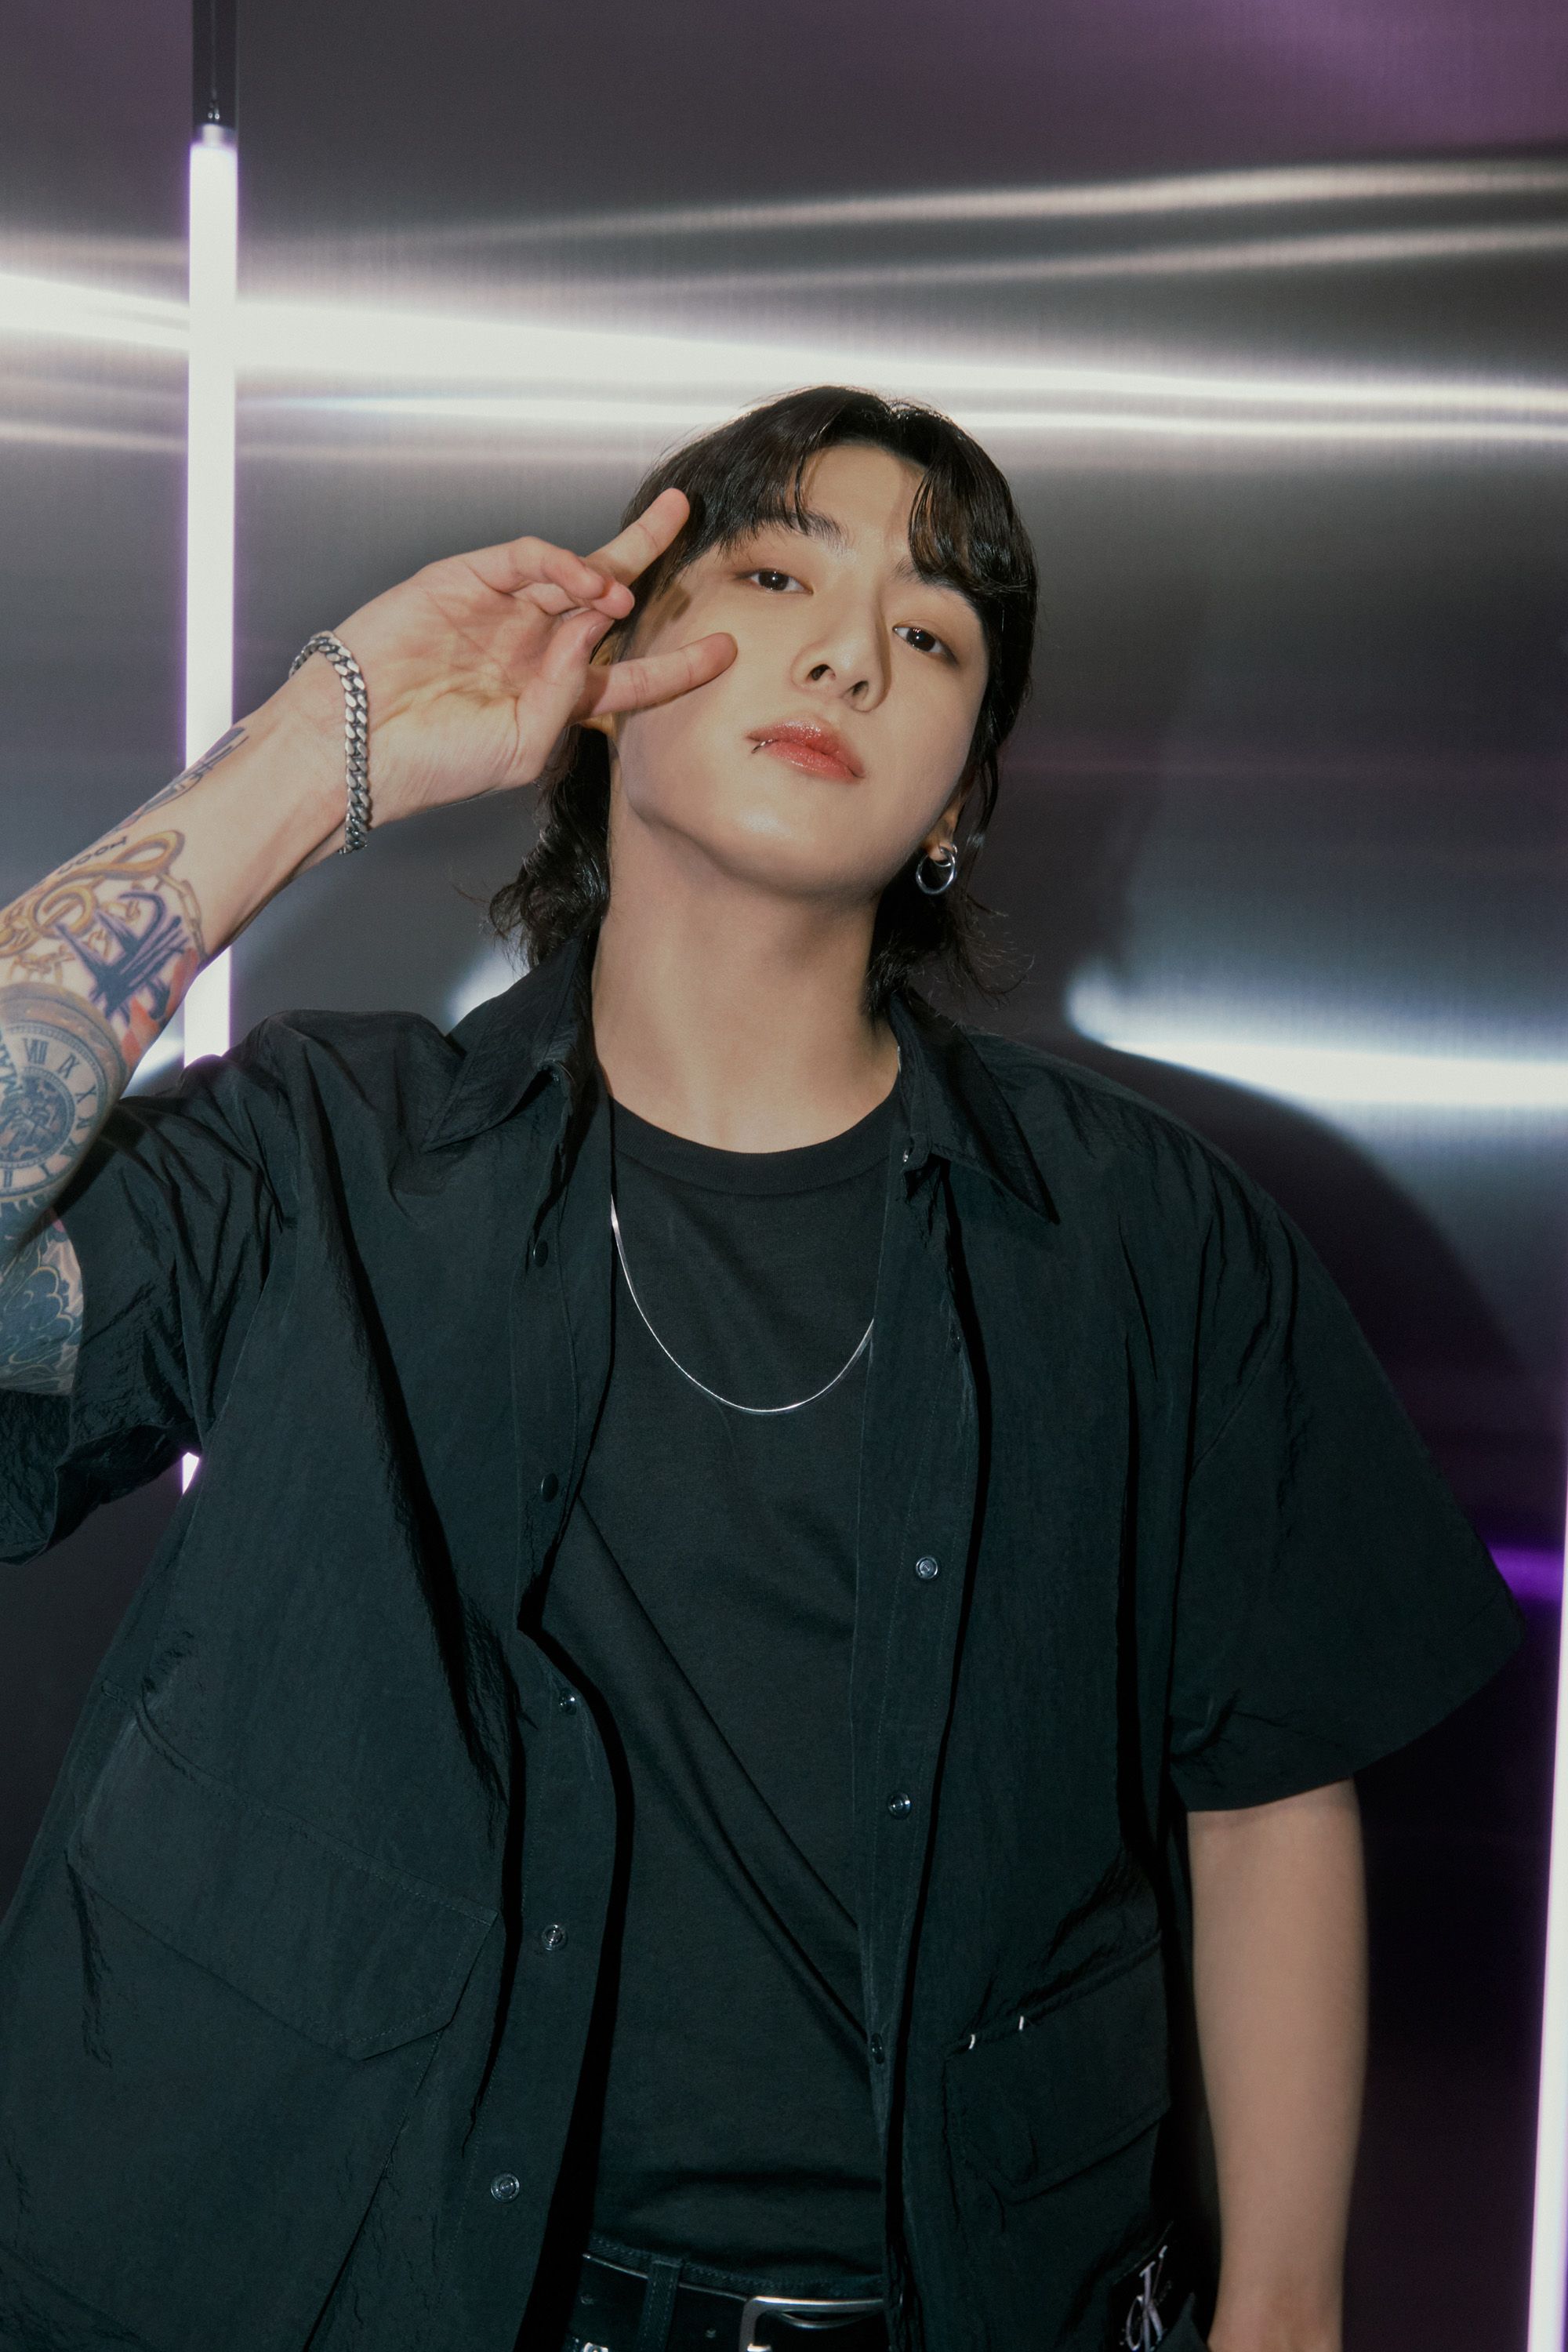 Calvin Klein Reveals New BTS Jungkook Campaign Imagery  Hypebeast